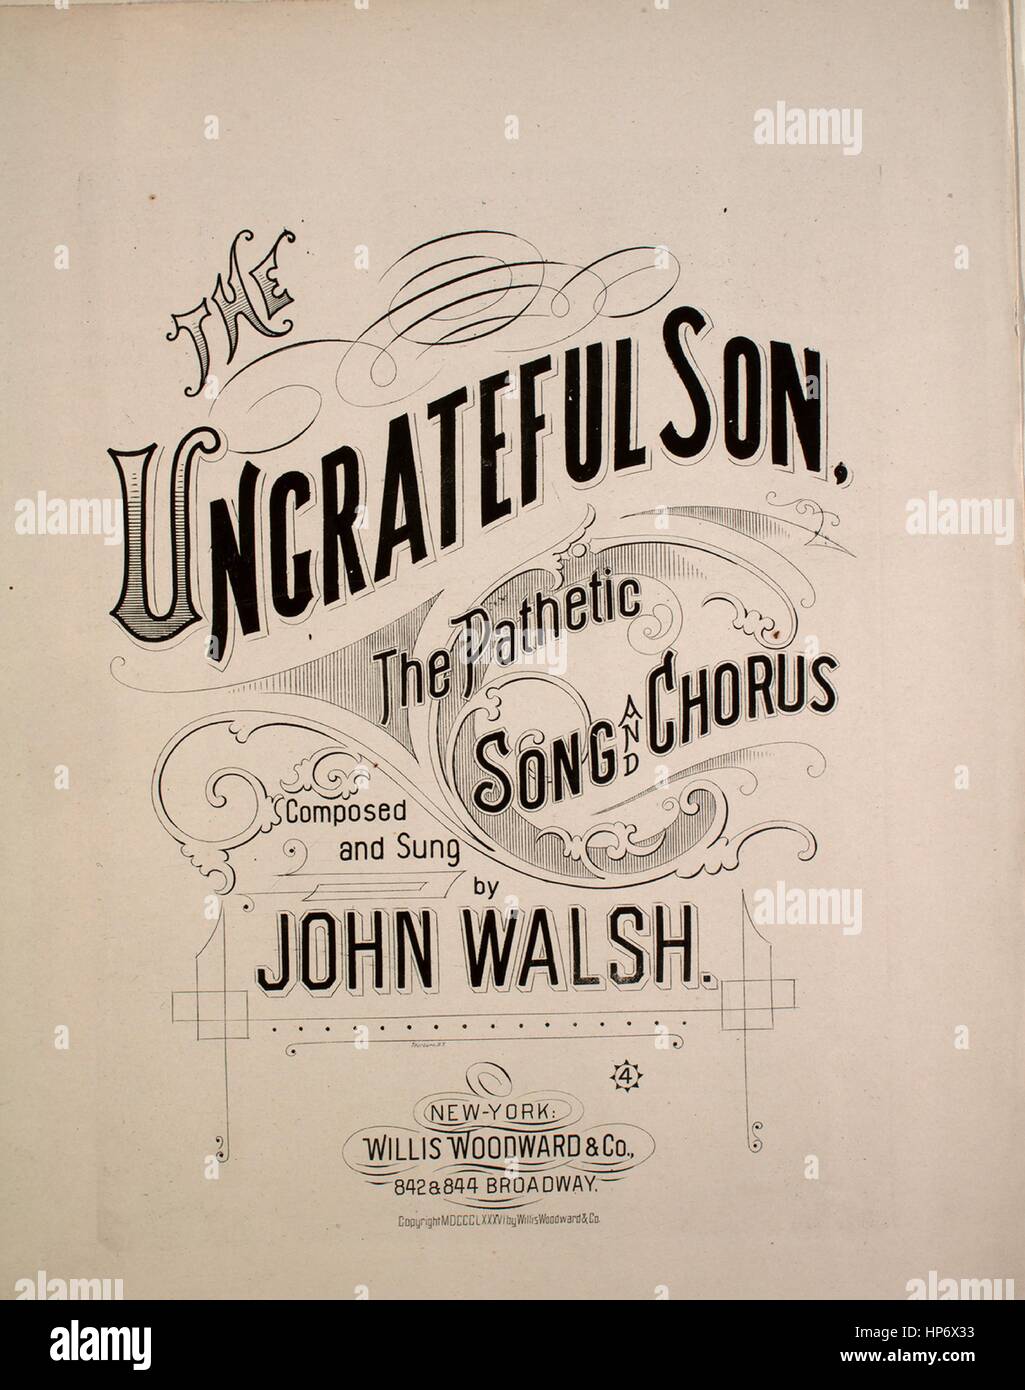 Sheet music cover image of the song 'The Ungrateful Son The Pathetic Song and Chorus', with original authorship notes reading 'Composed by John Walsh', United States, 1886. The publisher is listed as 'Willis Woodward and Co., 842 and 844 Broadway', the form of composition is 'strophic with chorus', the instrumentation is 'piano and voice (solo and satb chorus)', the first line reads 'A poor old man of seventy and his wife of sixty-two, one night in winter when the snow fell fast', and the illustration artist is listed as 'None'. Stock Photo